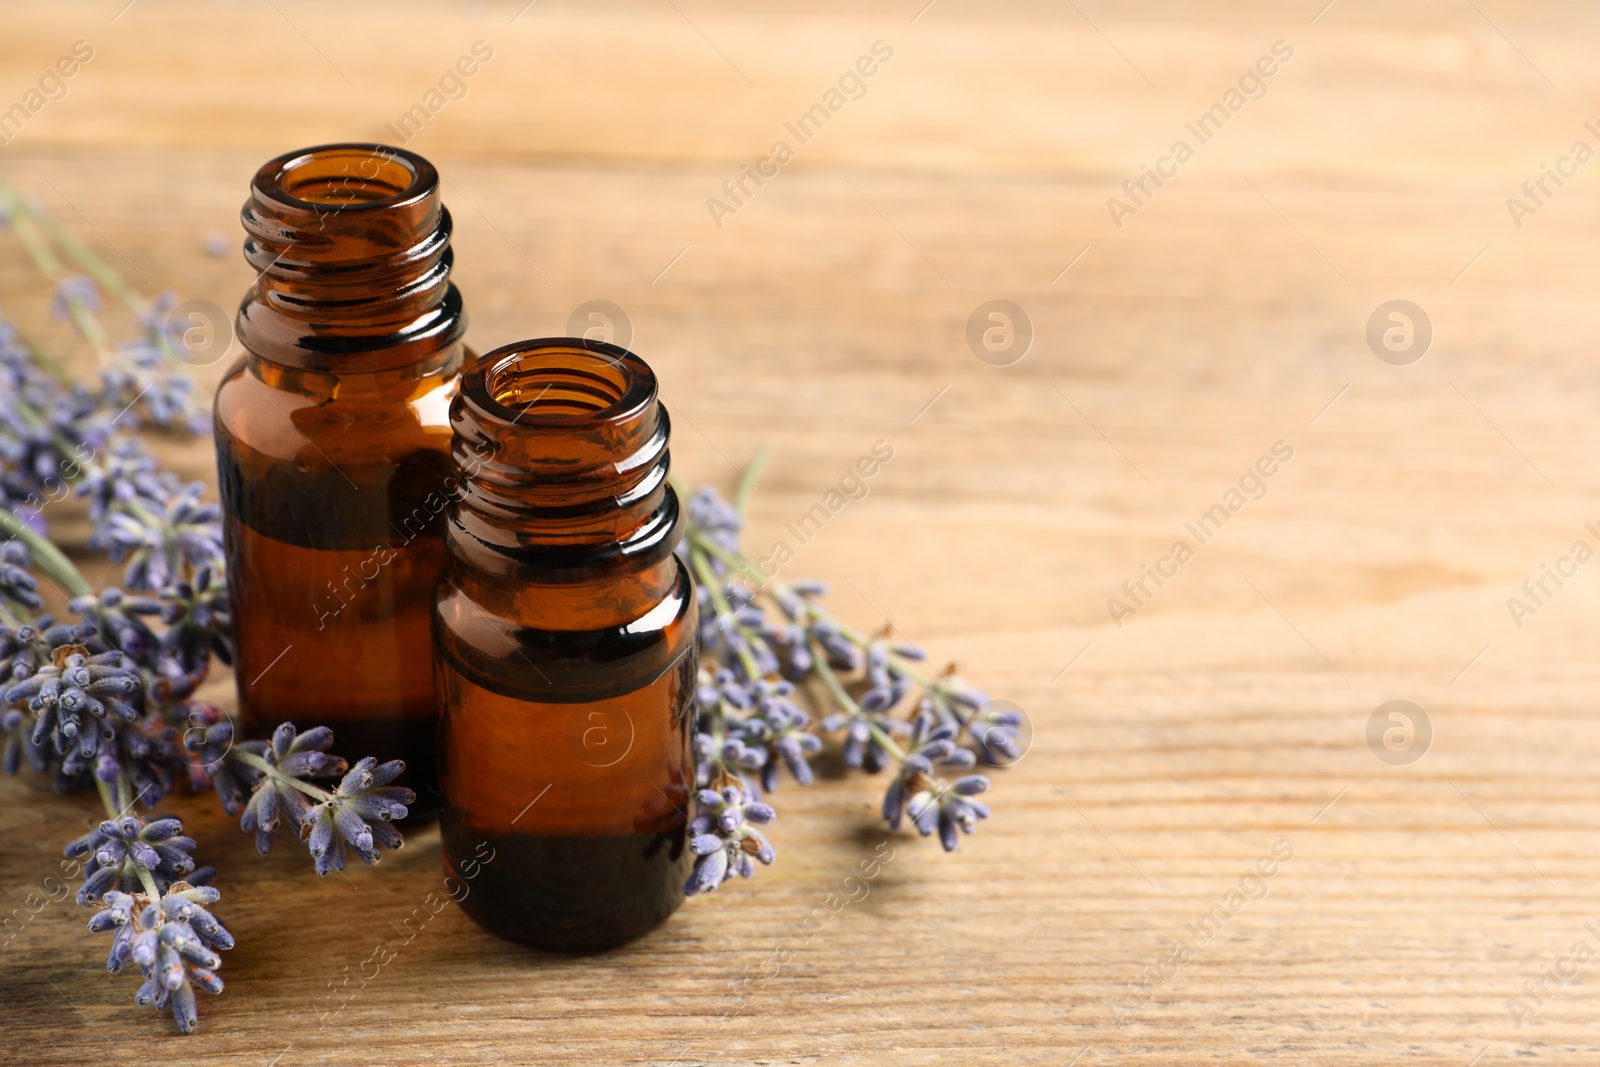 Photo of Essential oil and lavender flowers on wooden table, closeup. Space for text